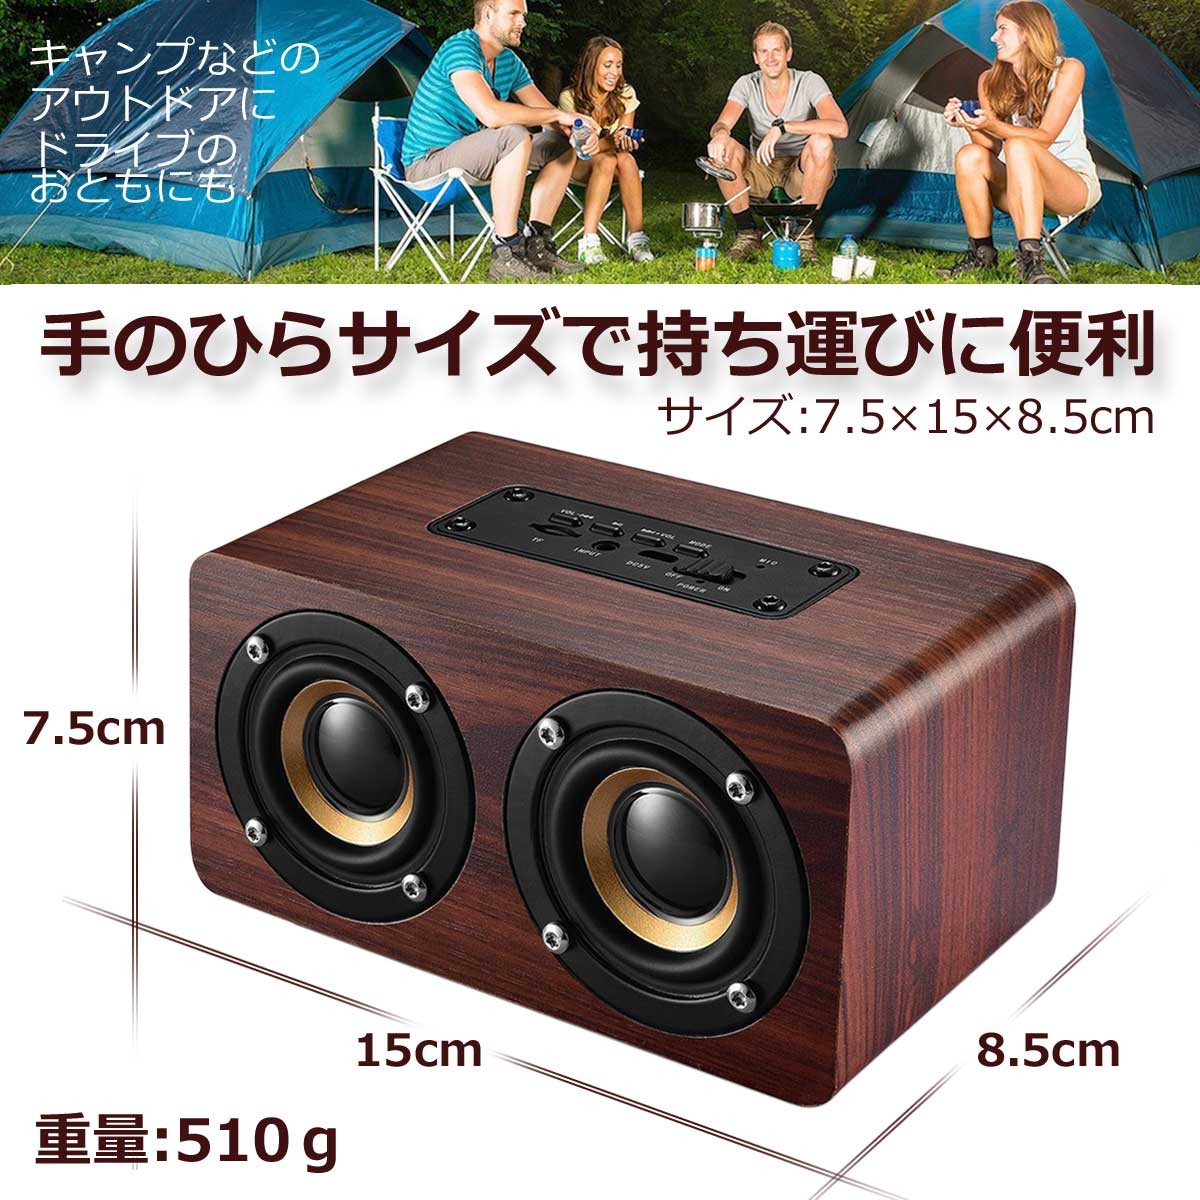  Bluetooth speaker Bluetooth speaker 5.0 wooden wood small size stereo wireless wireless connection smartphone tablet PC mobile hands free stylish 